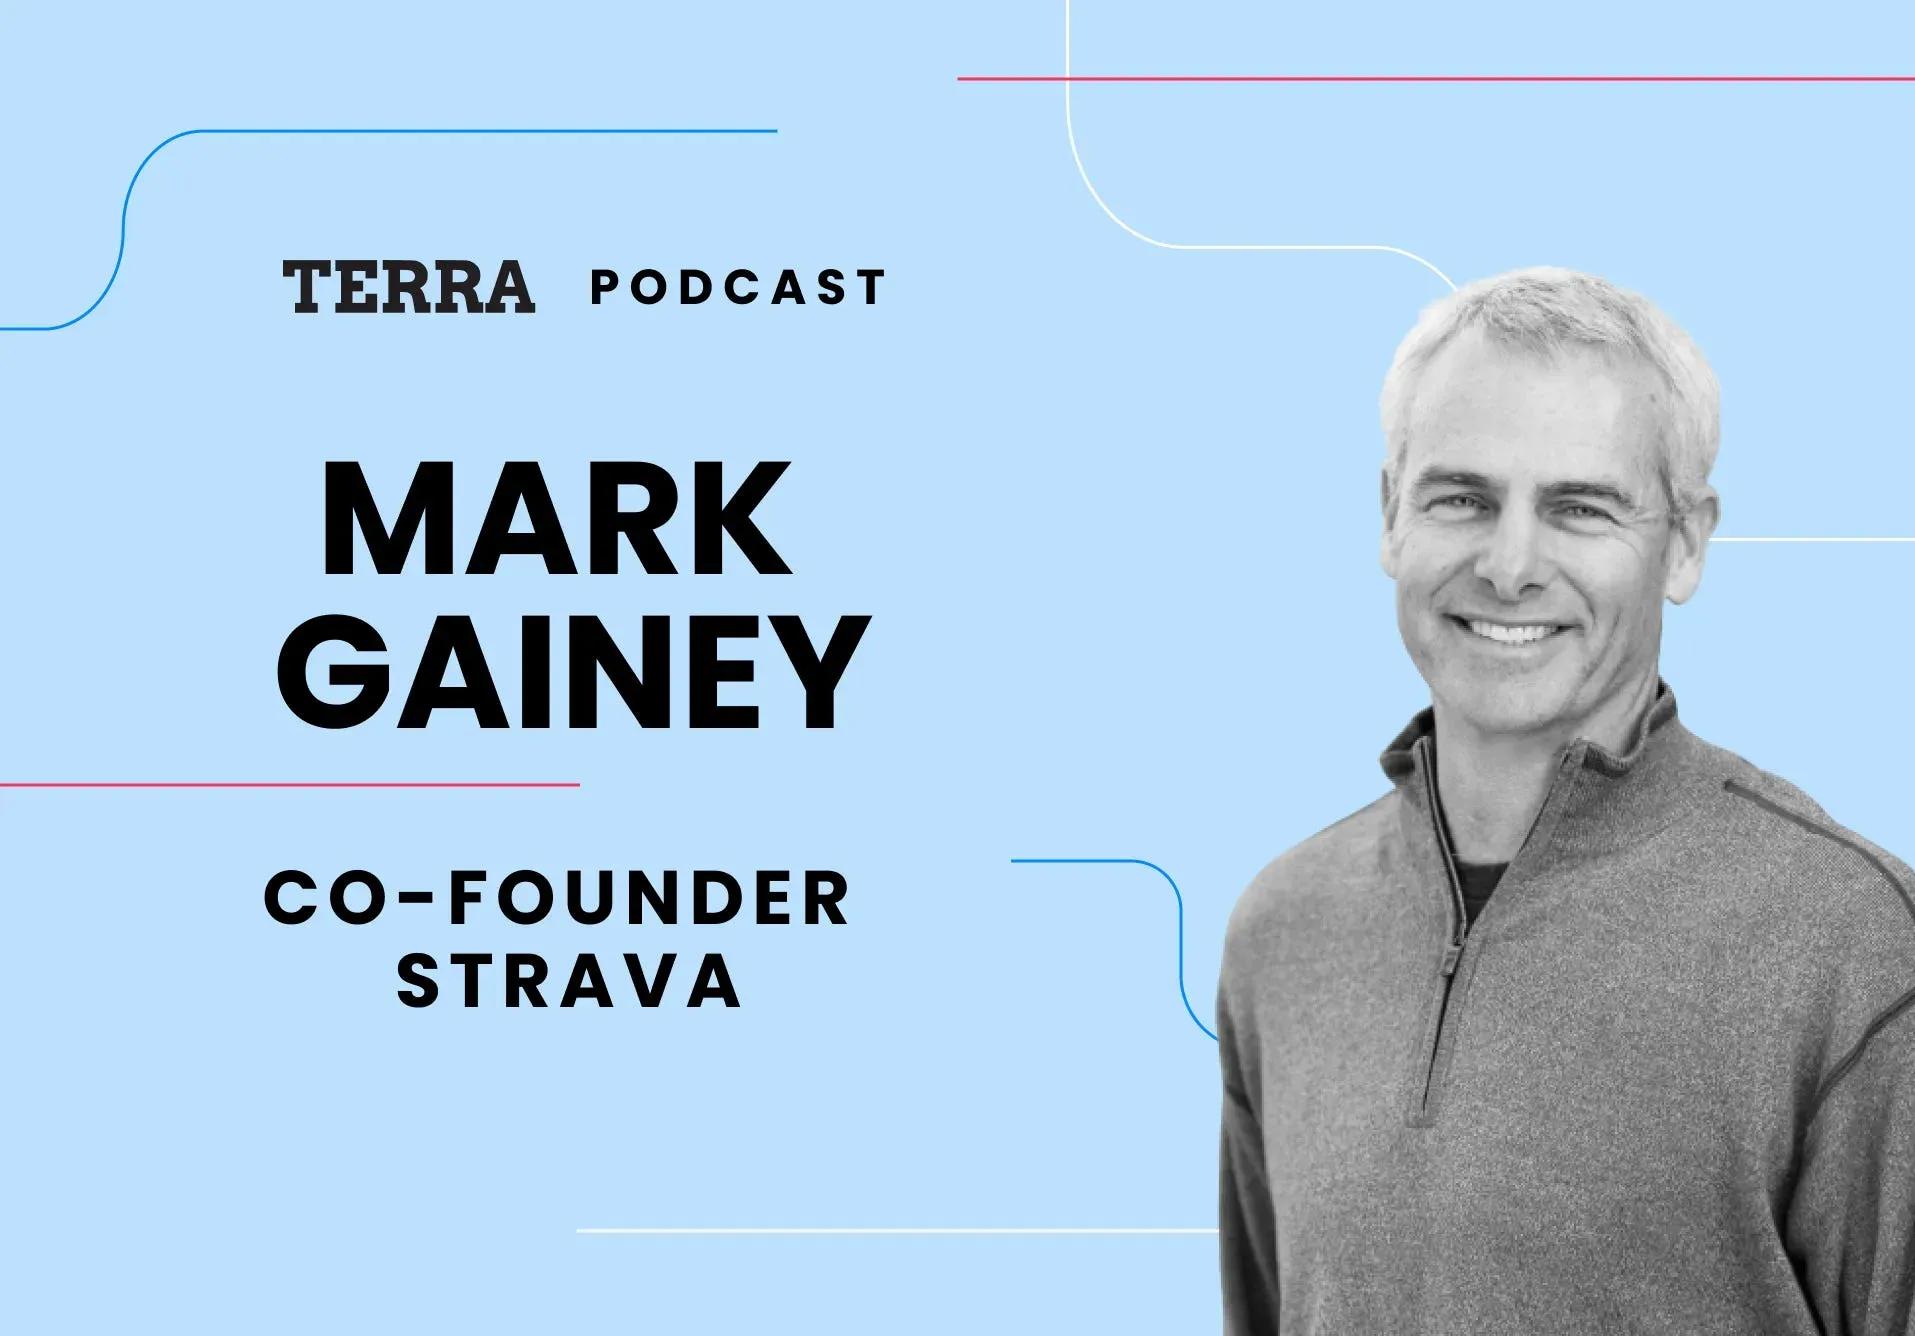 Co-founder and Chairman of Strava: A podcast with Mark Gainey